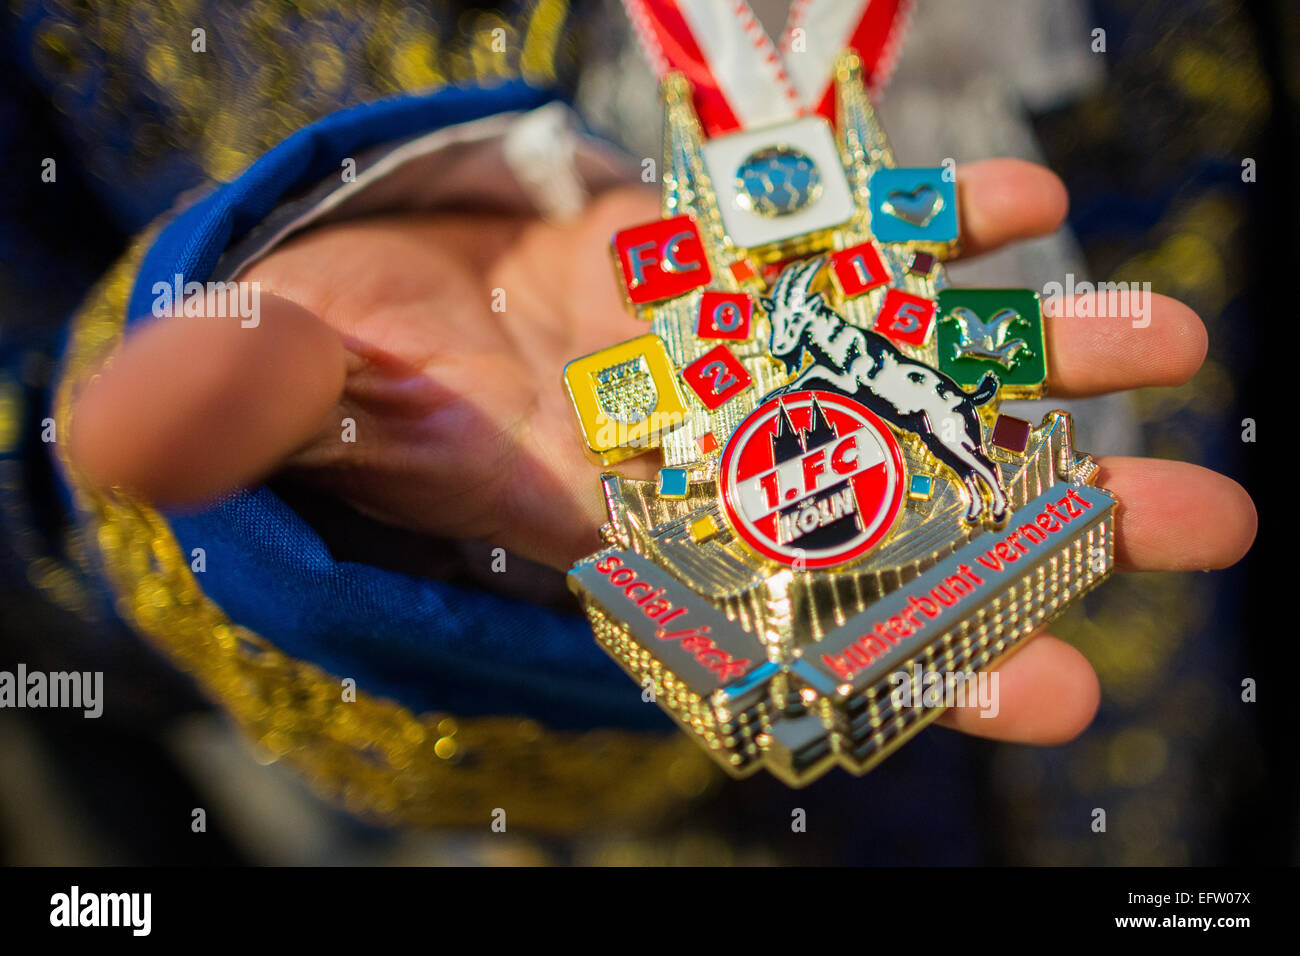 Cologne, Germany. 10th Feb, 2015. The medal of 1. FC Koel at a carnival meeting in Cologne, Germany, 10 February 2015. German Bundesliga football team 1. FC Koeln has invited carnival revelers to their annual meeting - this time, however, as a carnival club. Recently, the three-time German champions were registered as official promoters of the custom by the Cologne Carnival festival committee. Photo: RALF VENNENBERND/dpa/Alamy Live News Stock Photo